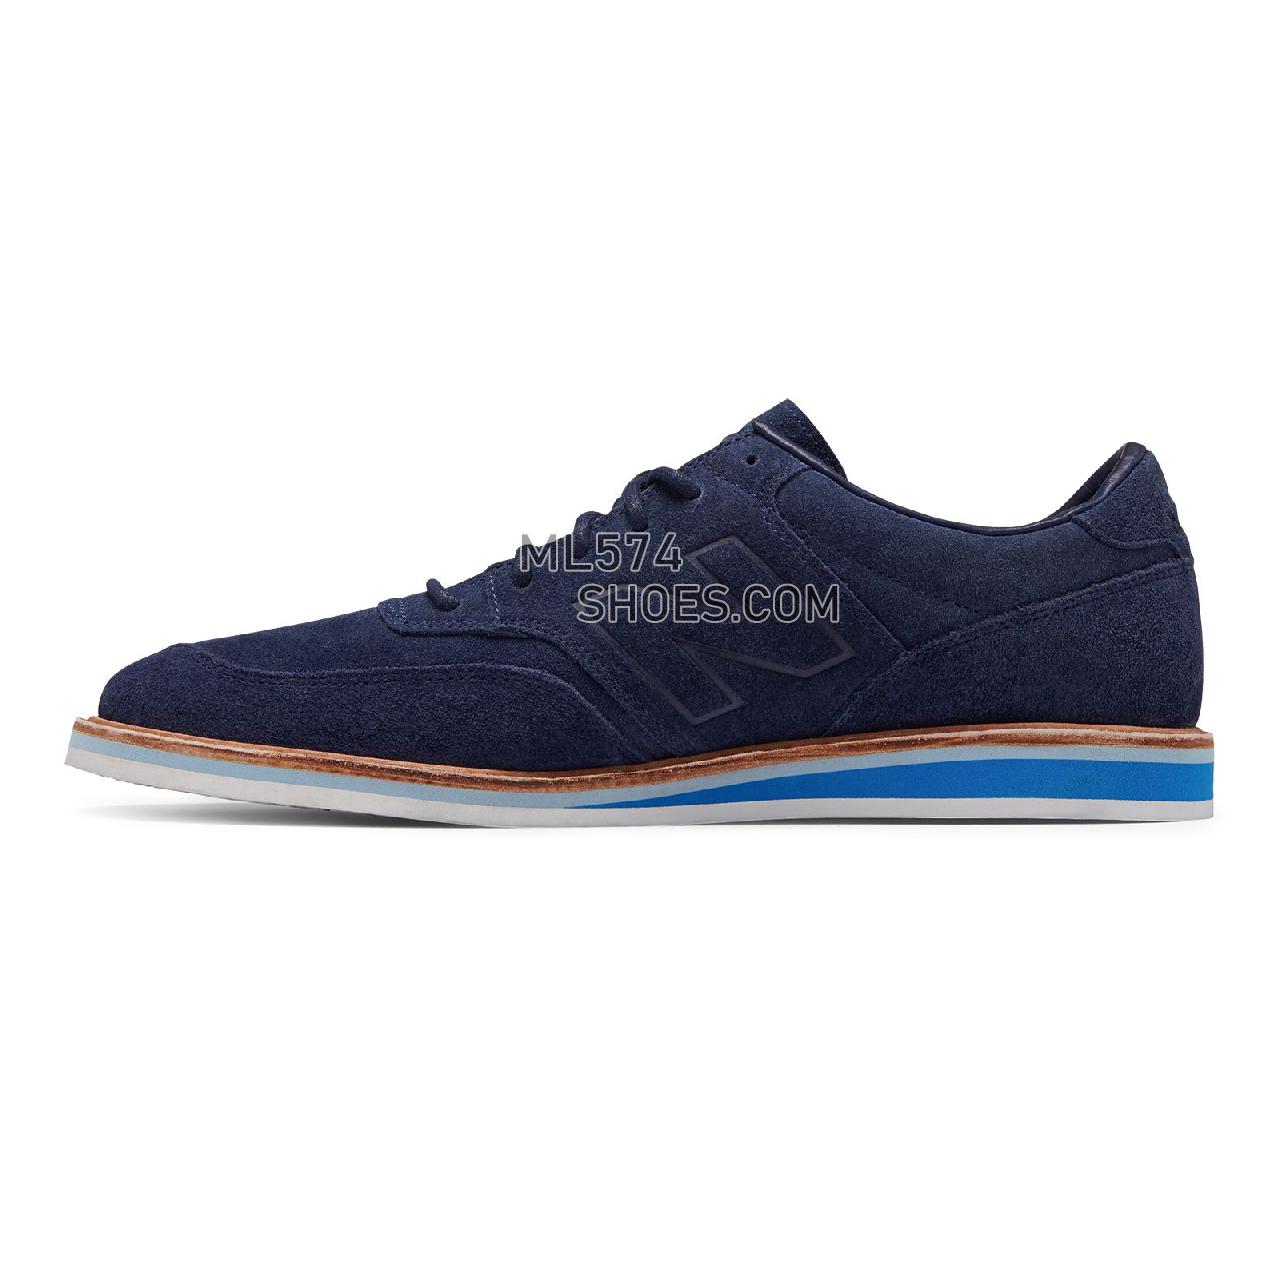 New Balance 1100 - Men's 1100 - Walking Navy with Blue - MD1100NV